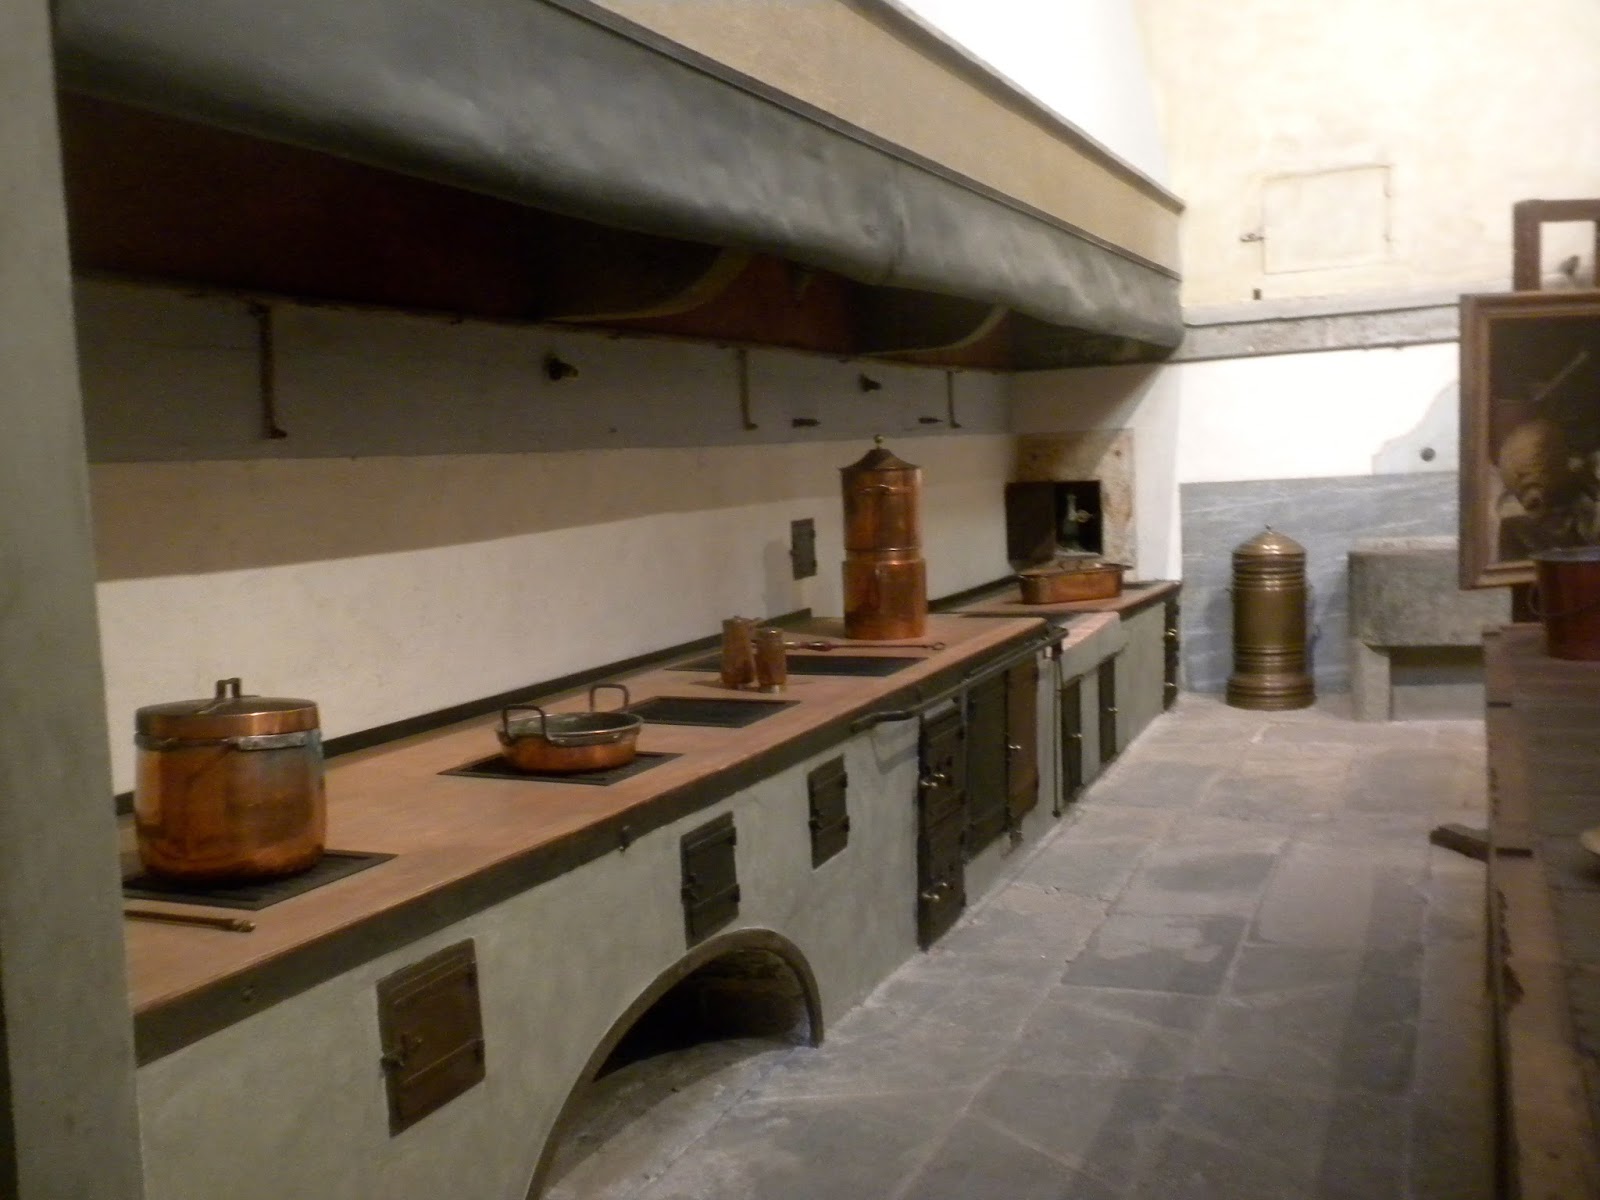 From A Tuscan Hillside The Big Kitchen At The Pitti Palace